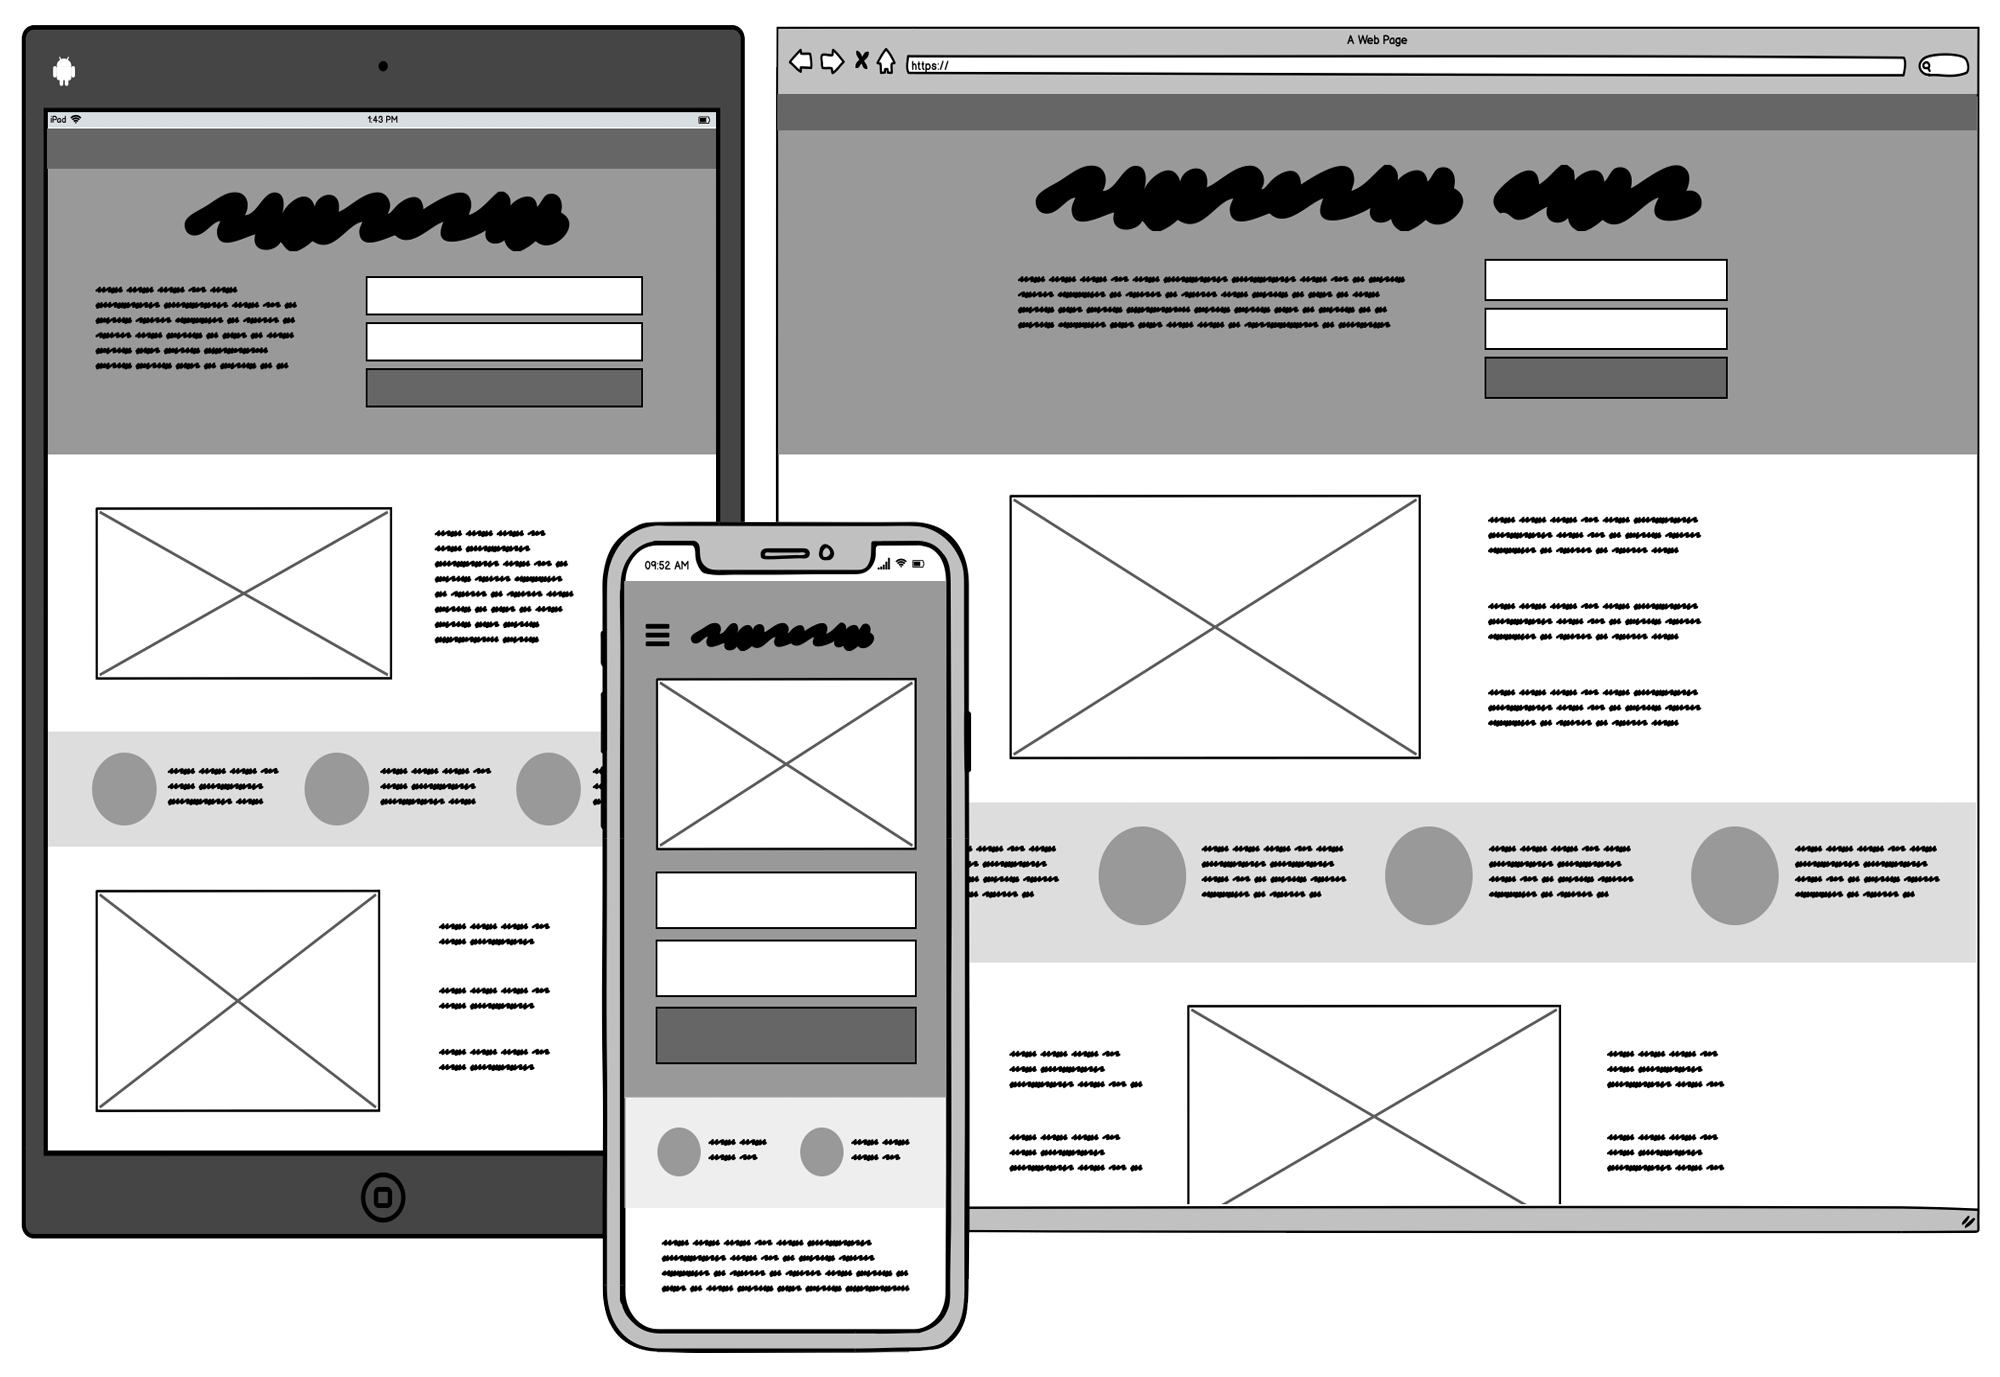 A wireframe, as illustrated by [Balsamiq in What are Wireframes?](https://balsamiq.com/learn/articles/what-are-wireframes/)